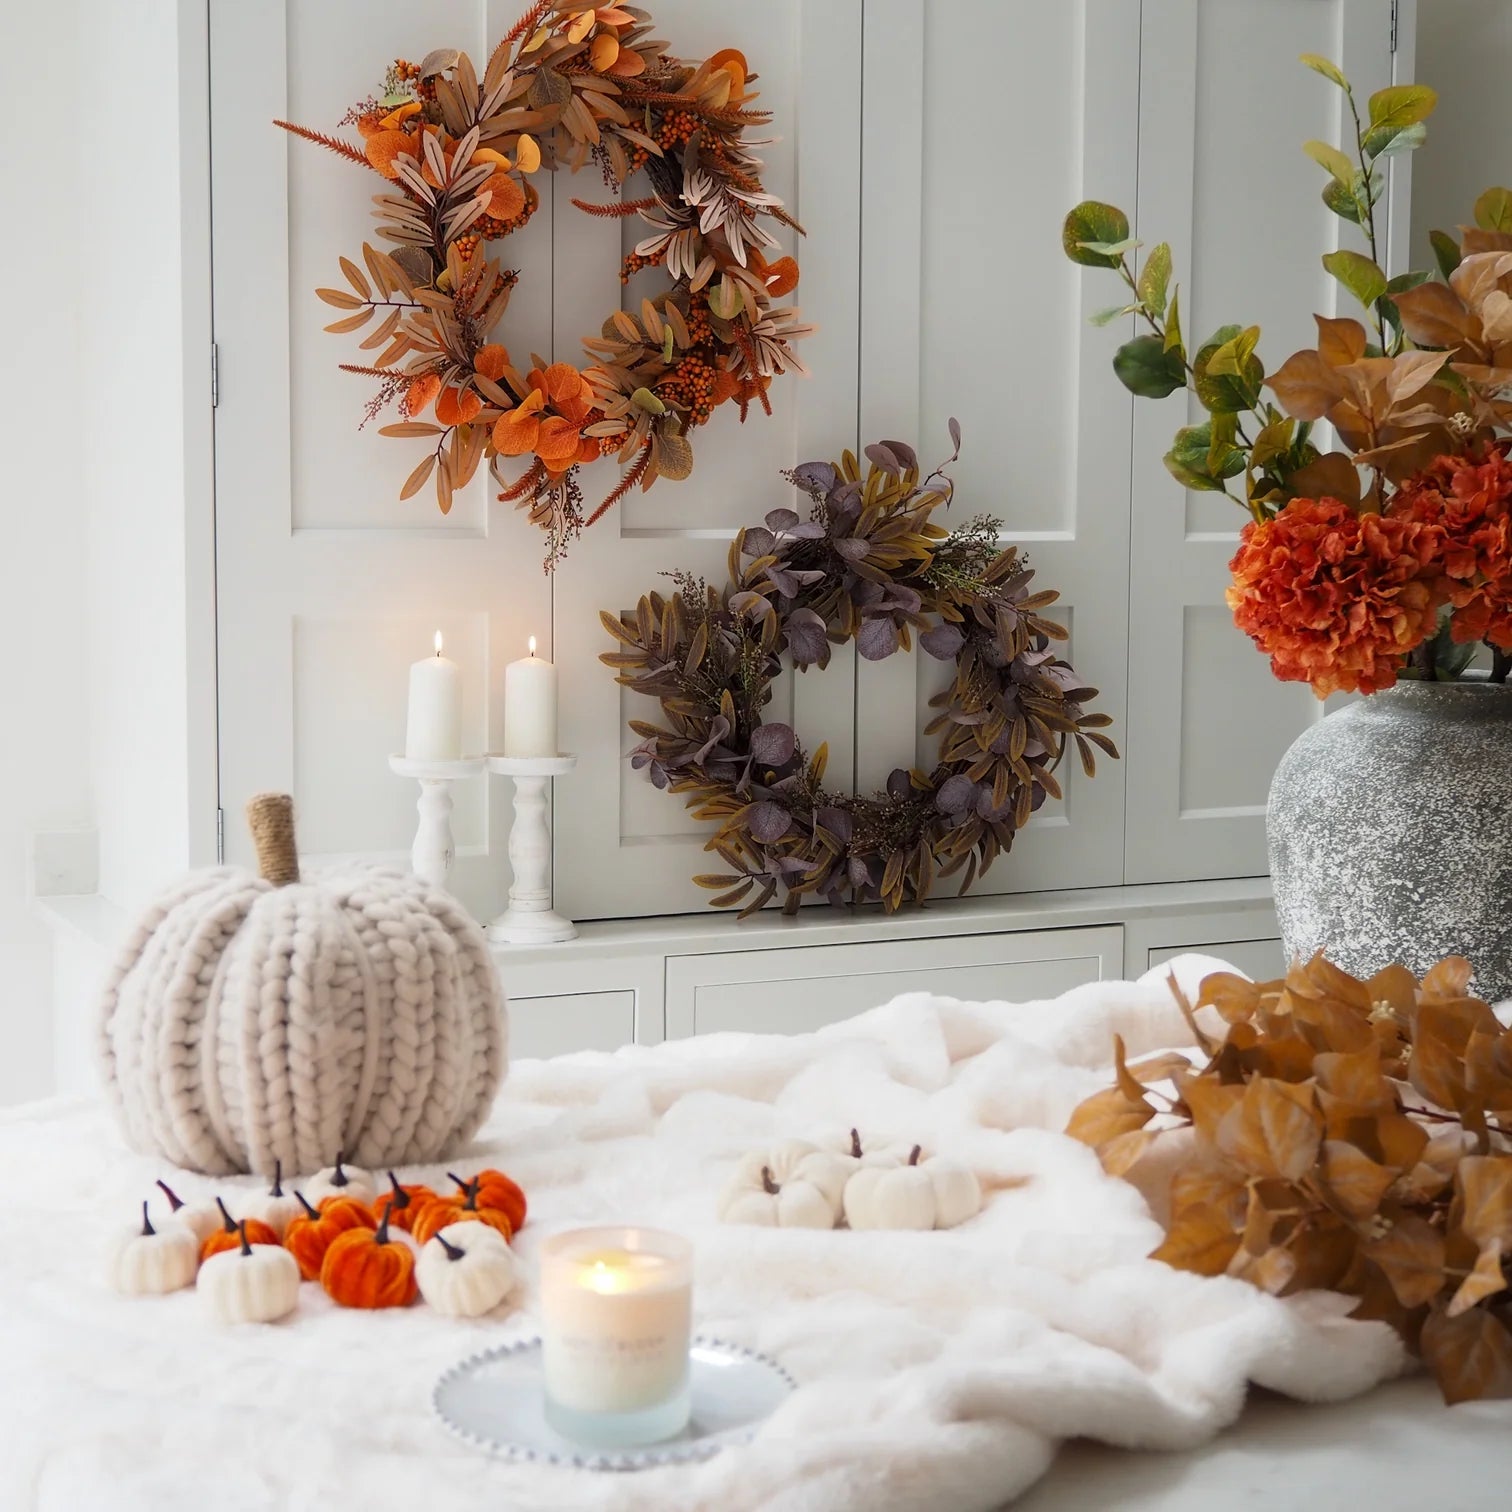 Tips for Styling your Home This Autumn